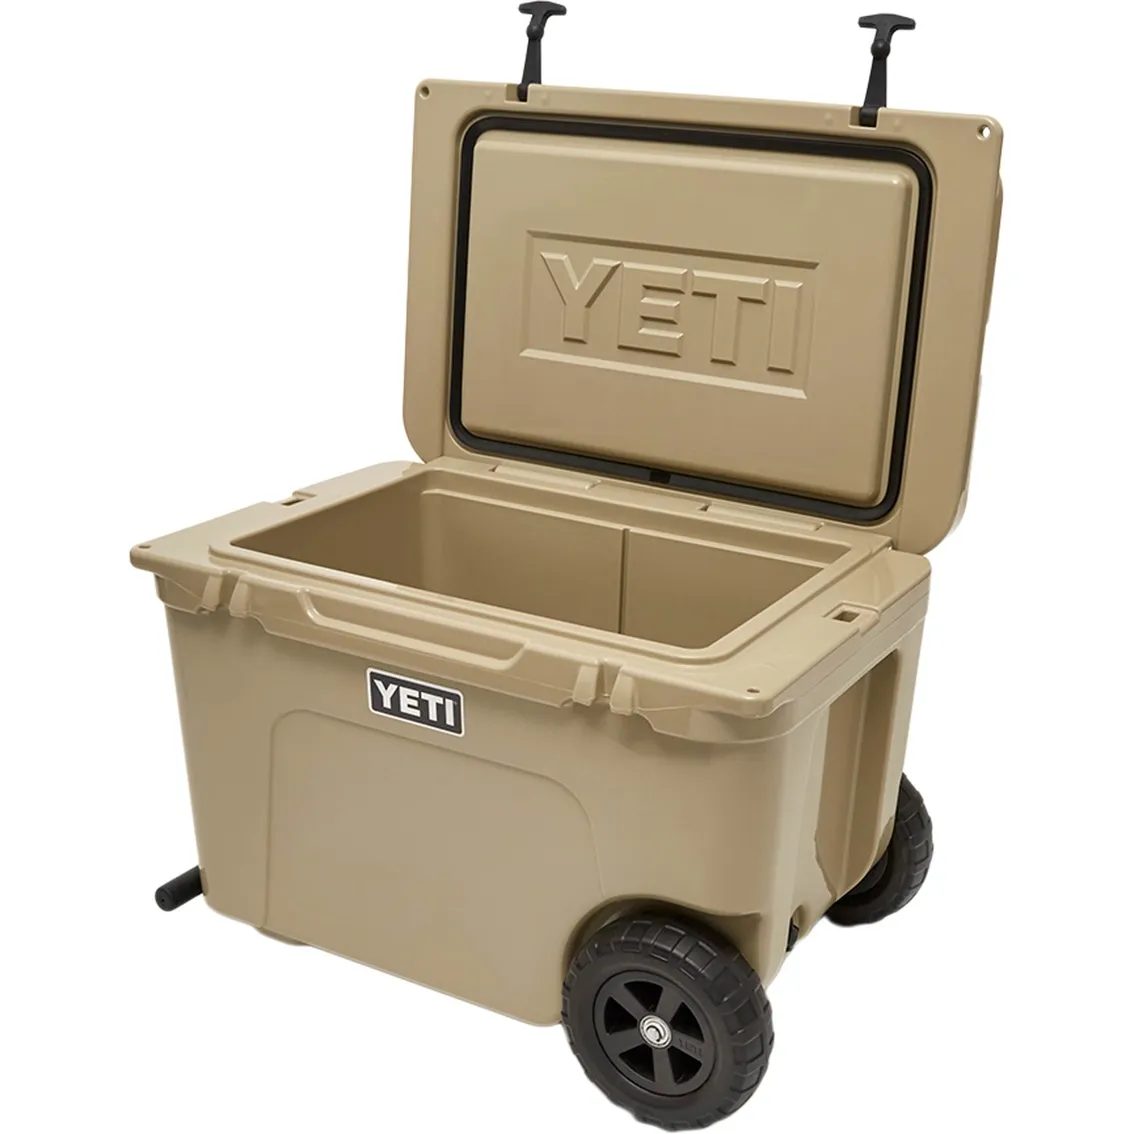 45 qt hard cooler hard style for camping yety cooler and BBQ cooler lunch